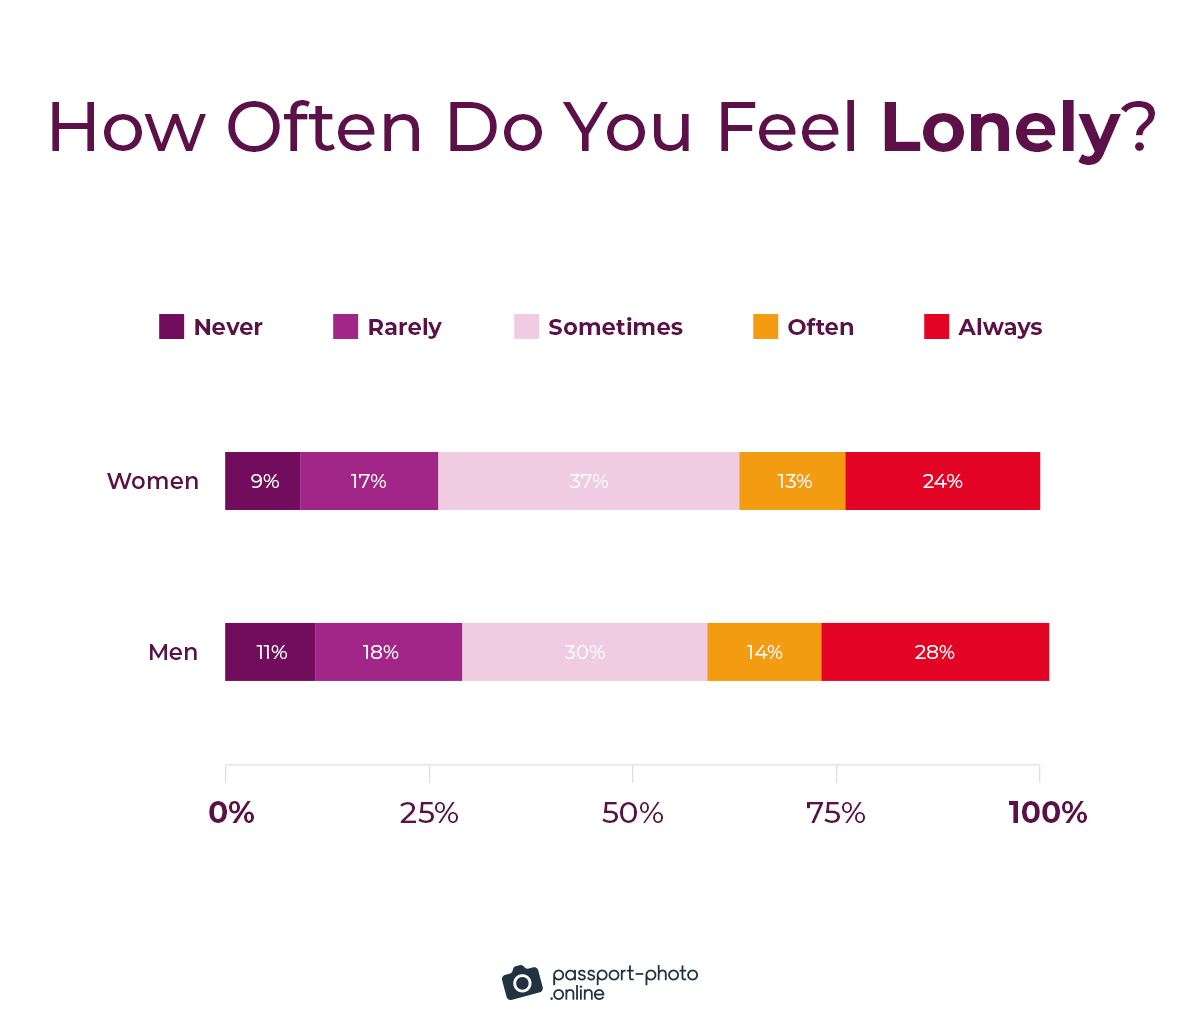 42% of male and 37% of female digital nomads often or always feel lonely